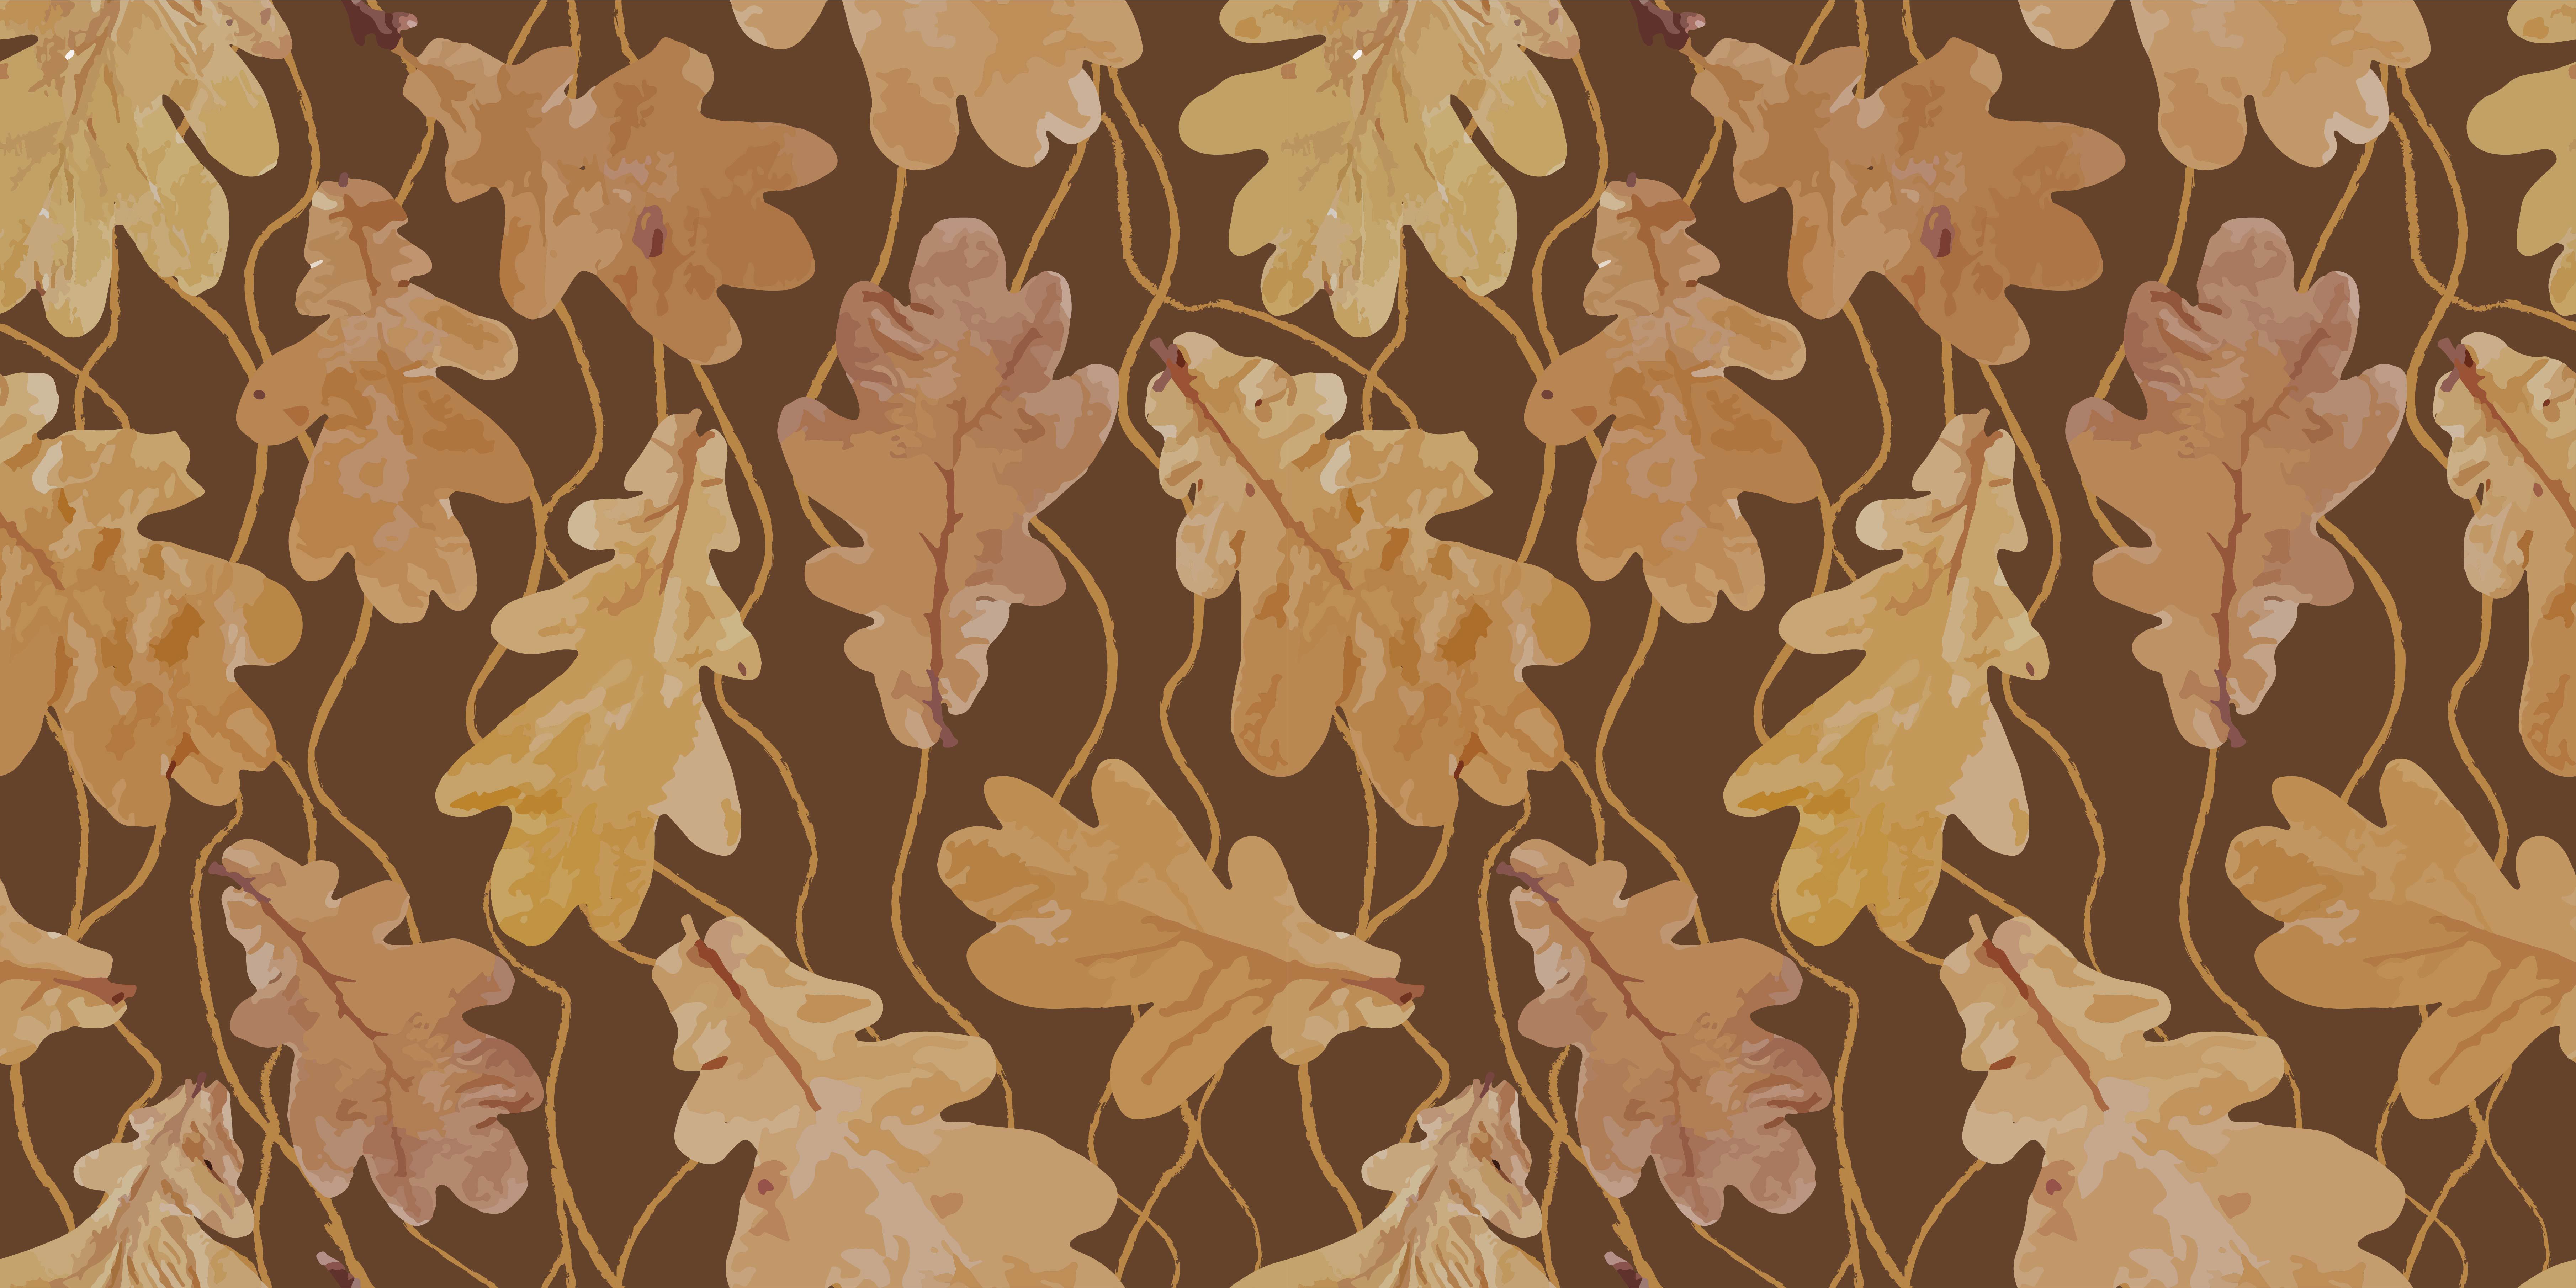 .Autumn geometric seamless patternBig banner for social media, covers for personal blogs, discount poster template for offline, online stores. autumn leaves on a dark background. Yellow leaves in real. .Autumn geometric seamless patternBig banner for social media, covers for personal blogs, discount poster template for offline, online stores. autumn leaves on a dark background. Yellow leaves in real.